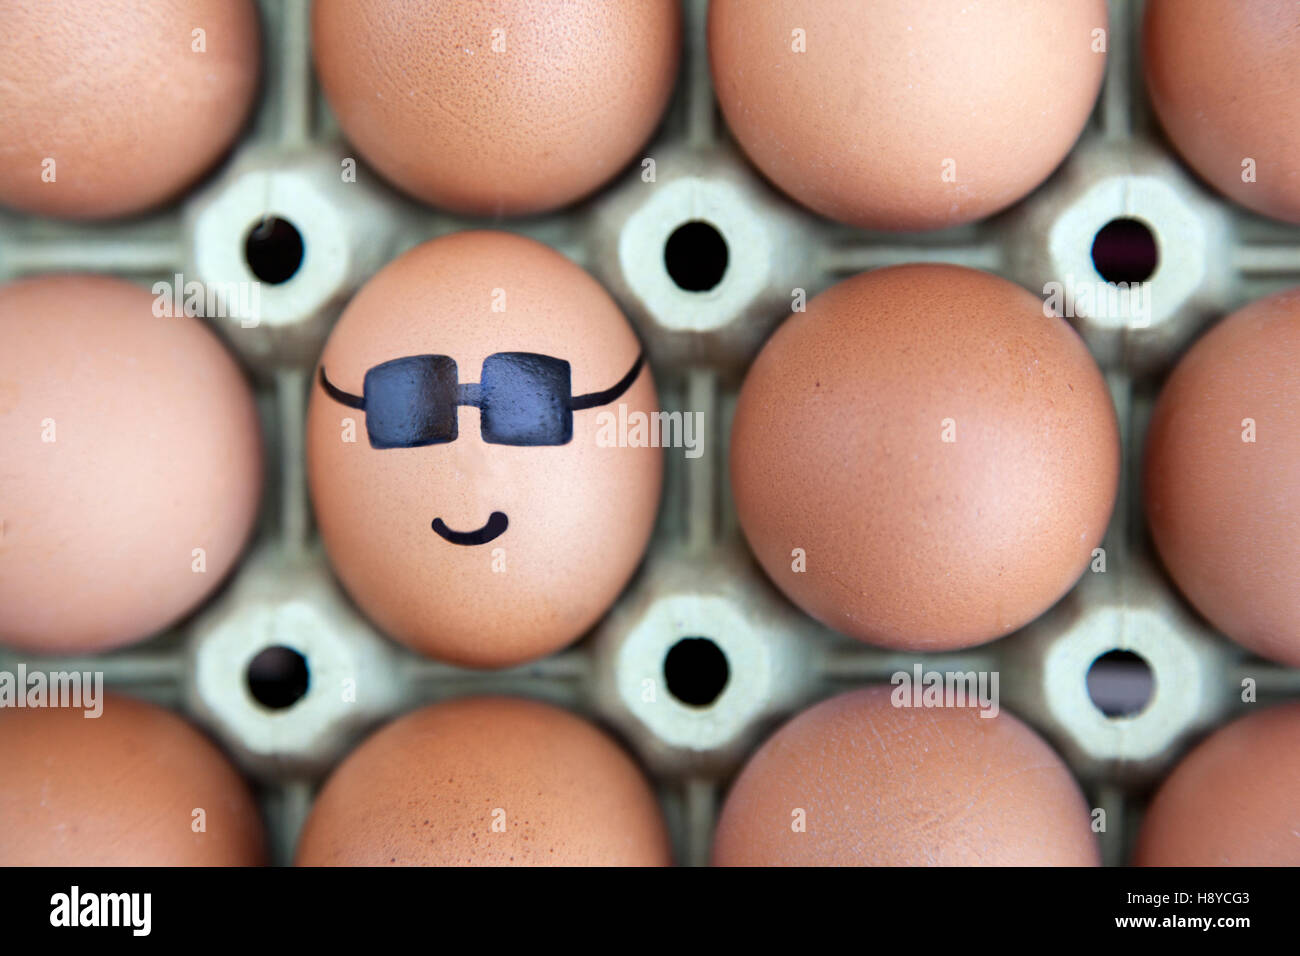 Egg wearing sunglasses. Summer concept. Blind concetp. Stock Photo